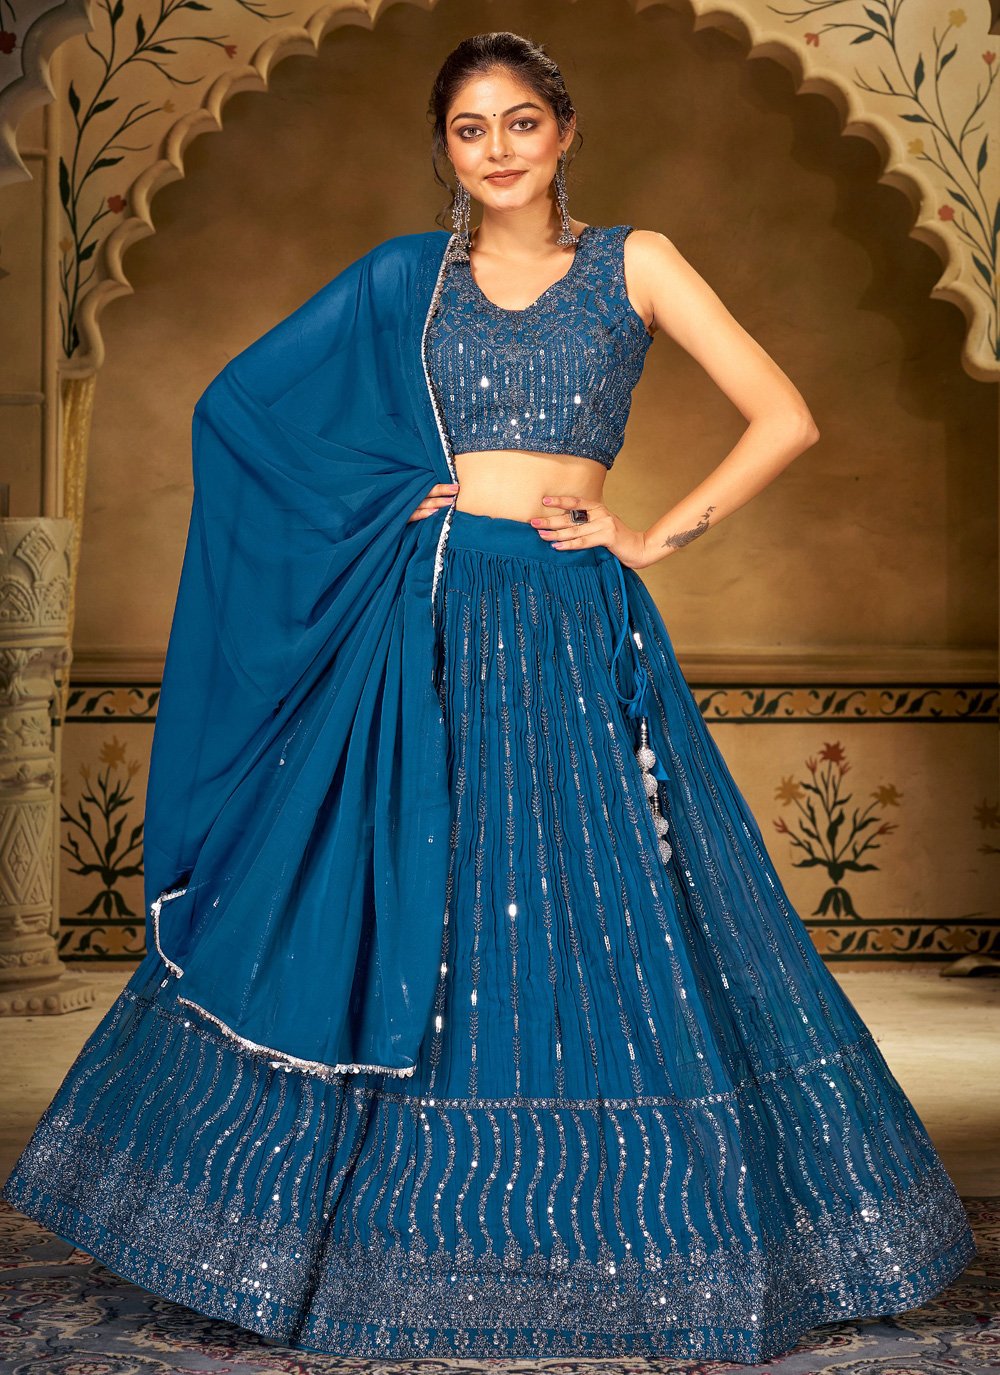 Party Wear Sky Blue Net Lehenga Choli With Embroidery Sequence Work and  Dupatta for Women, Designer Lehenga, Wedding Wear Outfit - Etsy